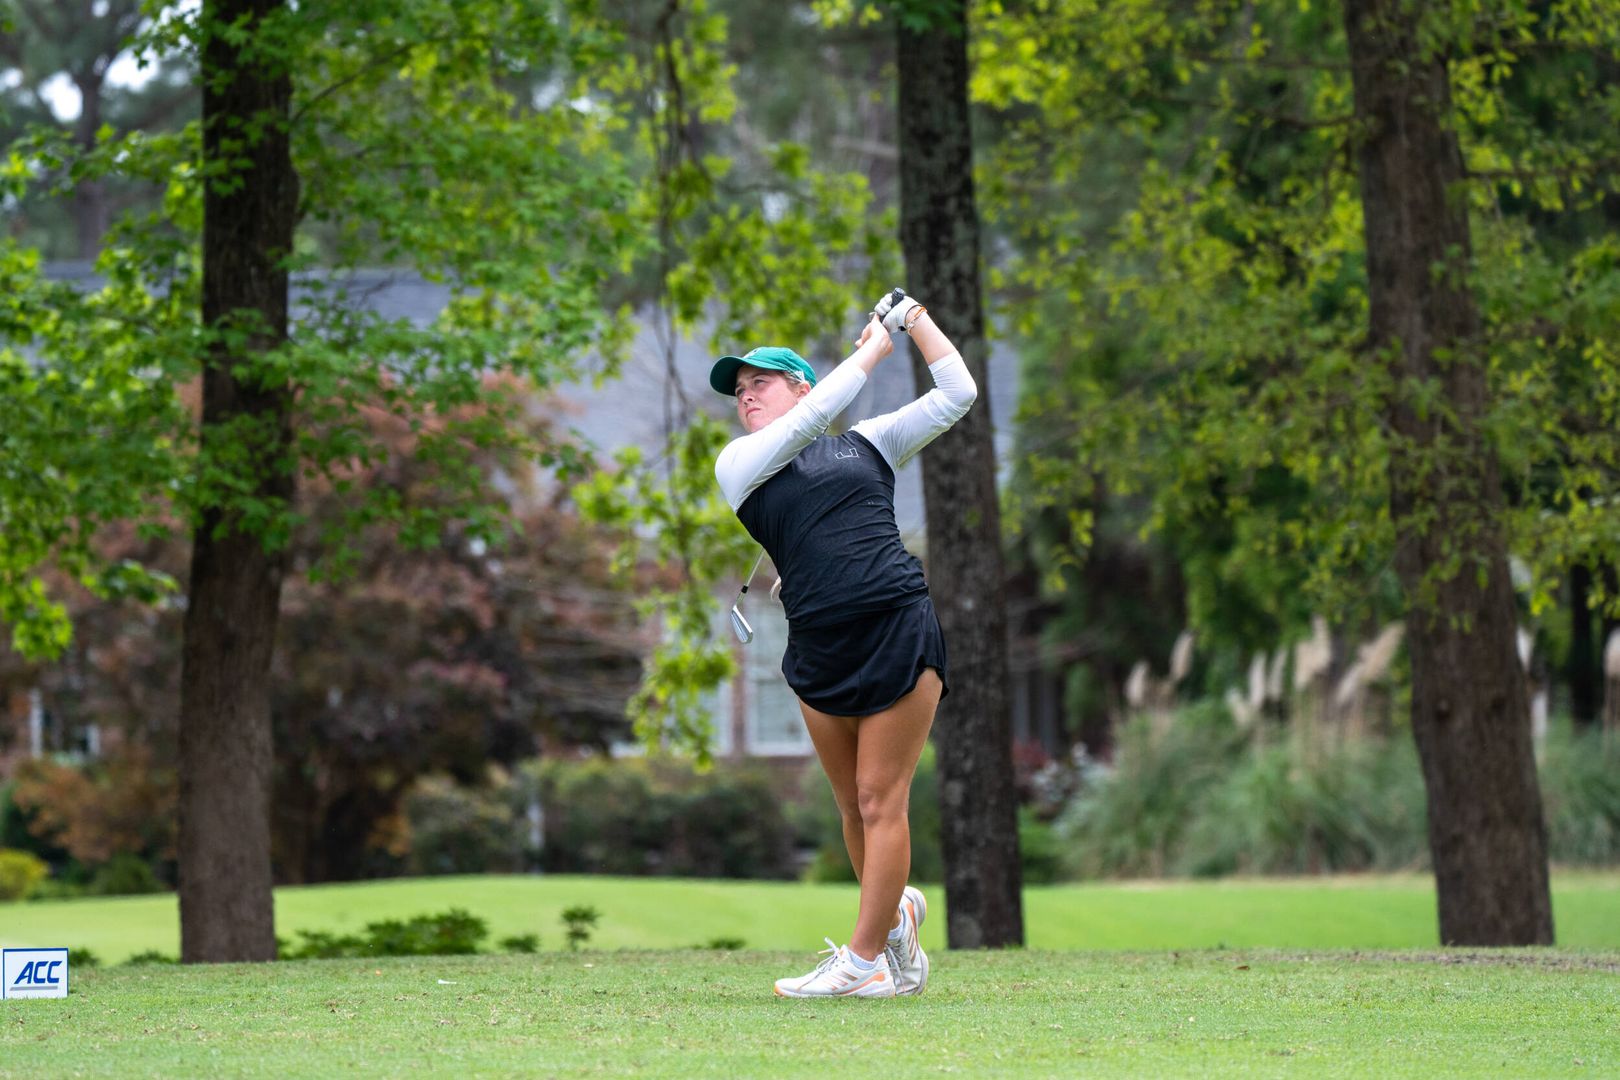 Hurricanes Set for Final Round of Stroke Play